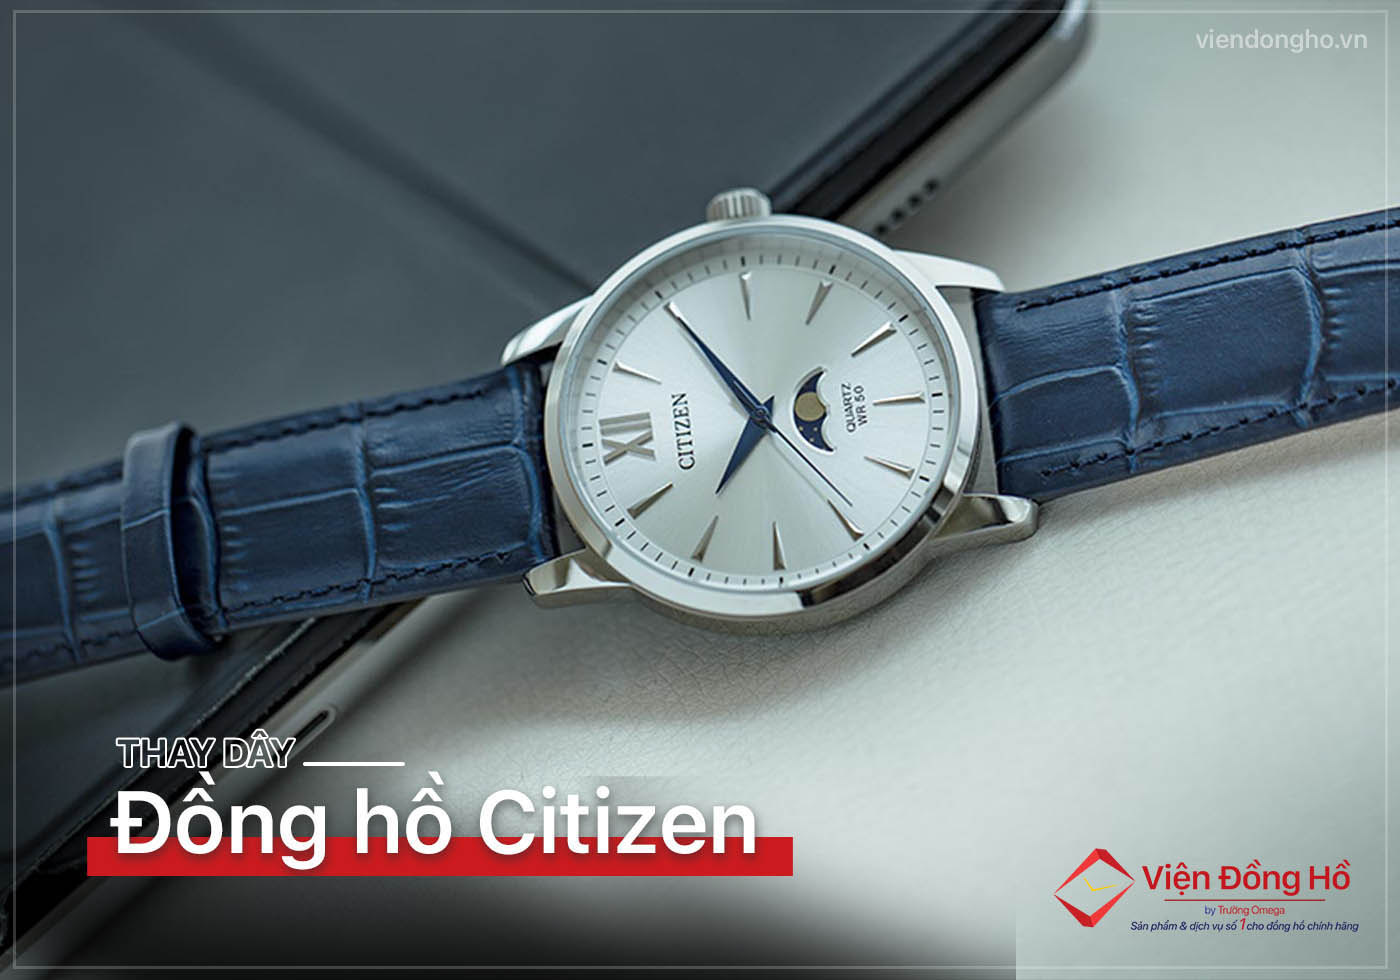 Thay day dong ho Citizen 5